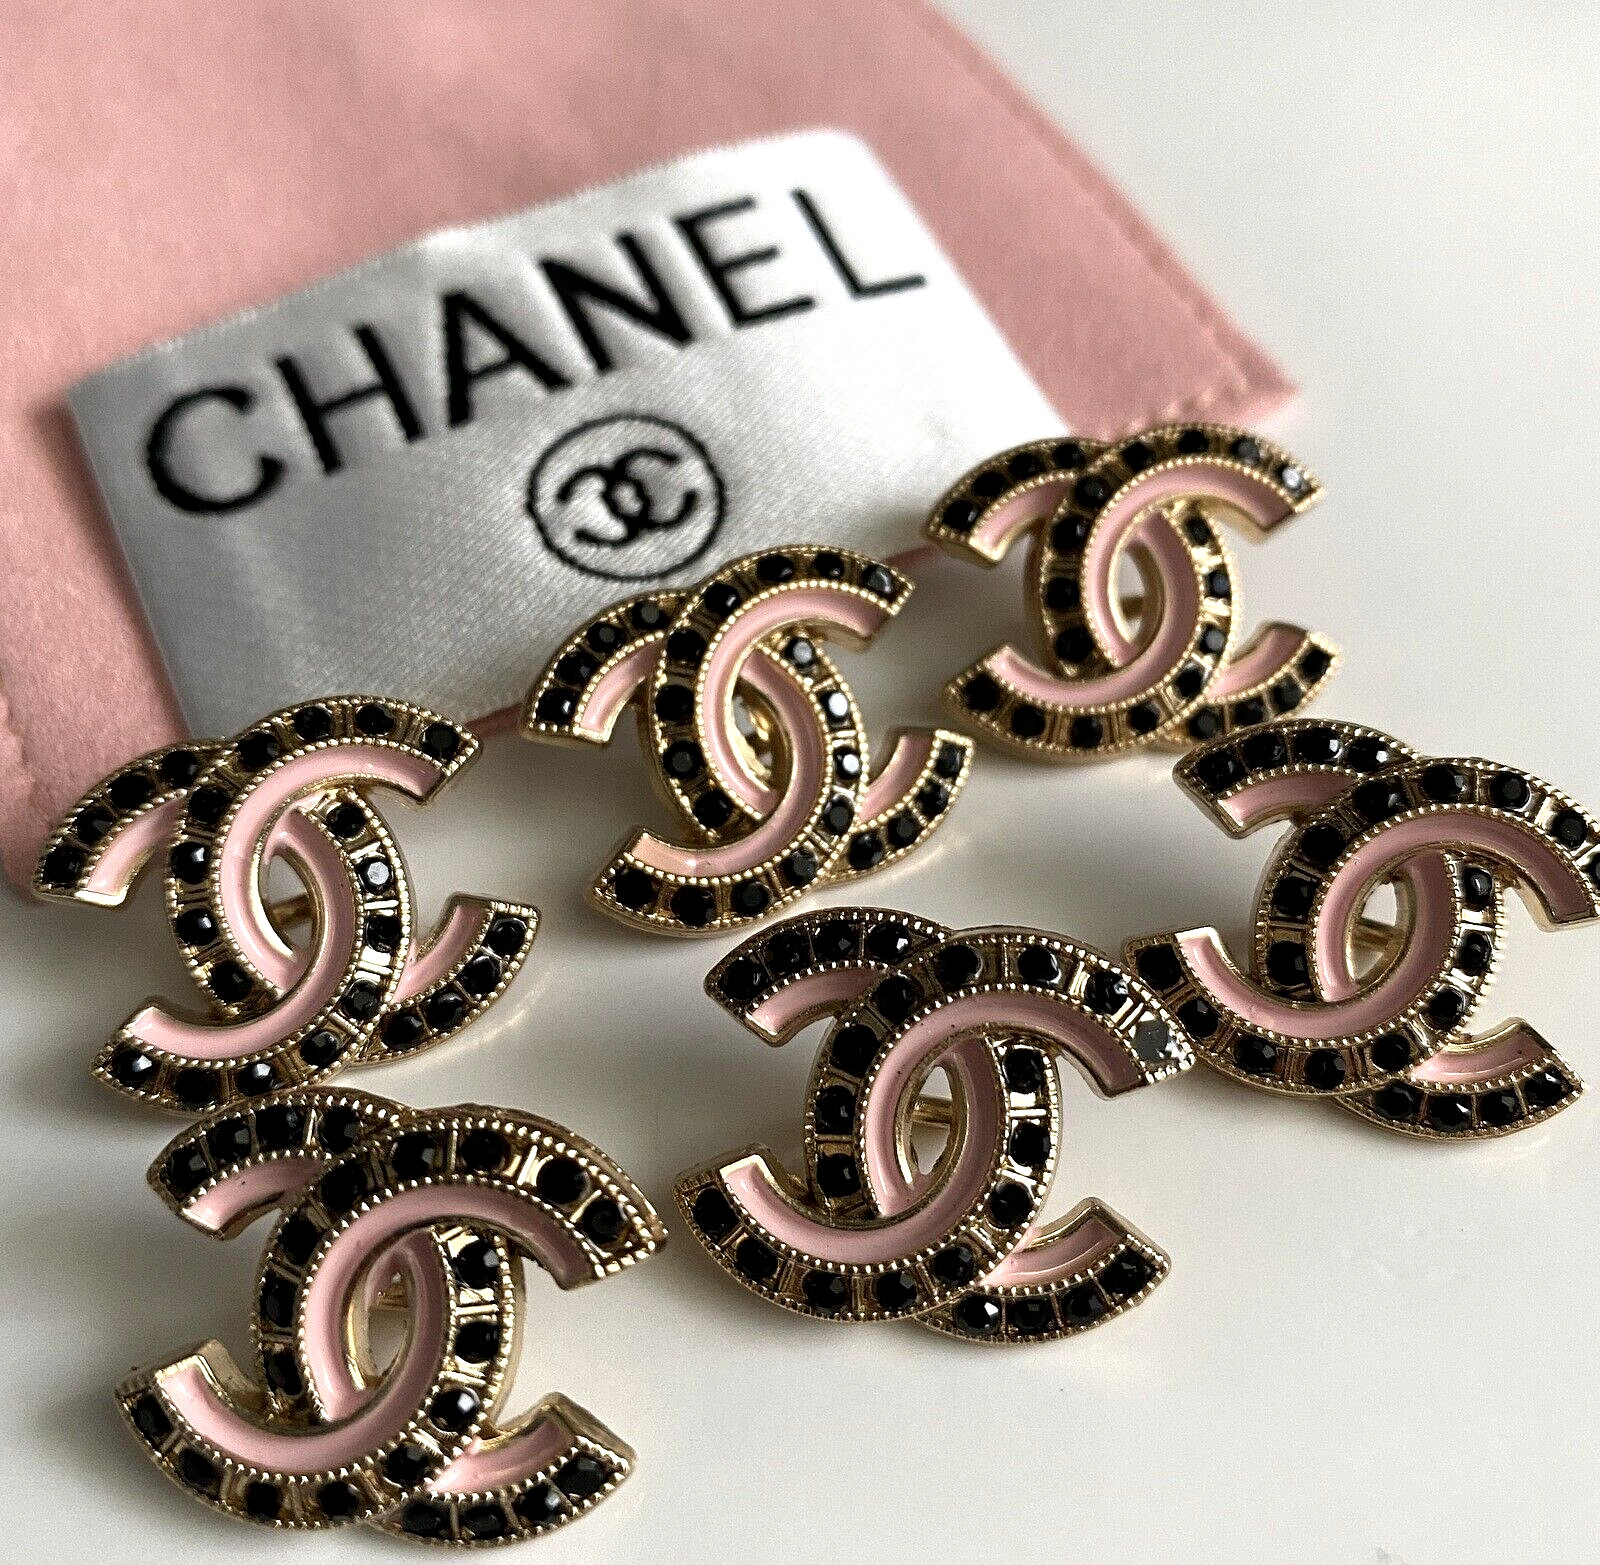 Lot of 10 Chanel Button Gold Tone CC Buttons 17x21 mm Stamped Logo Rhinestones